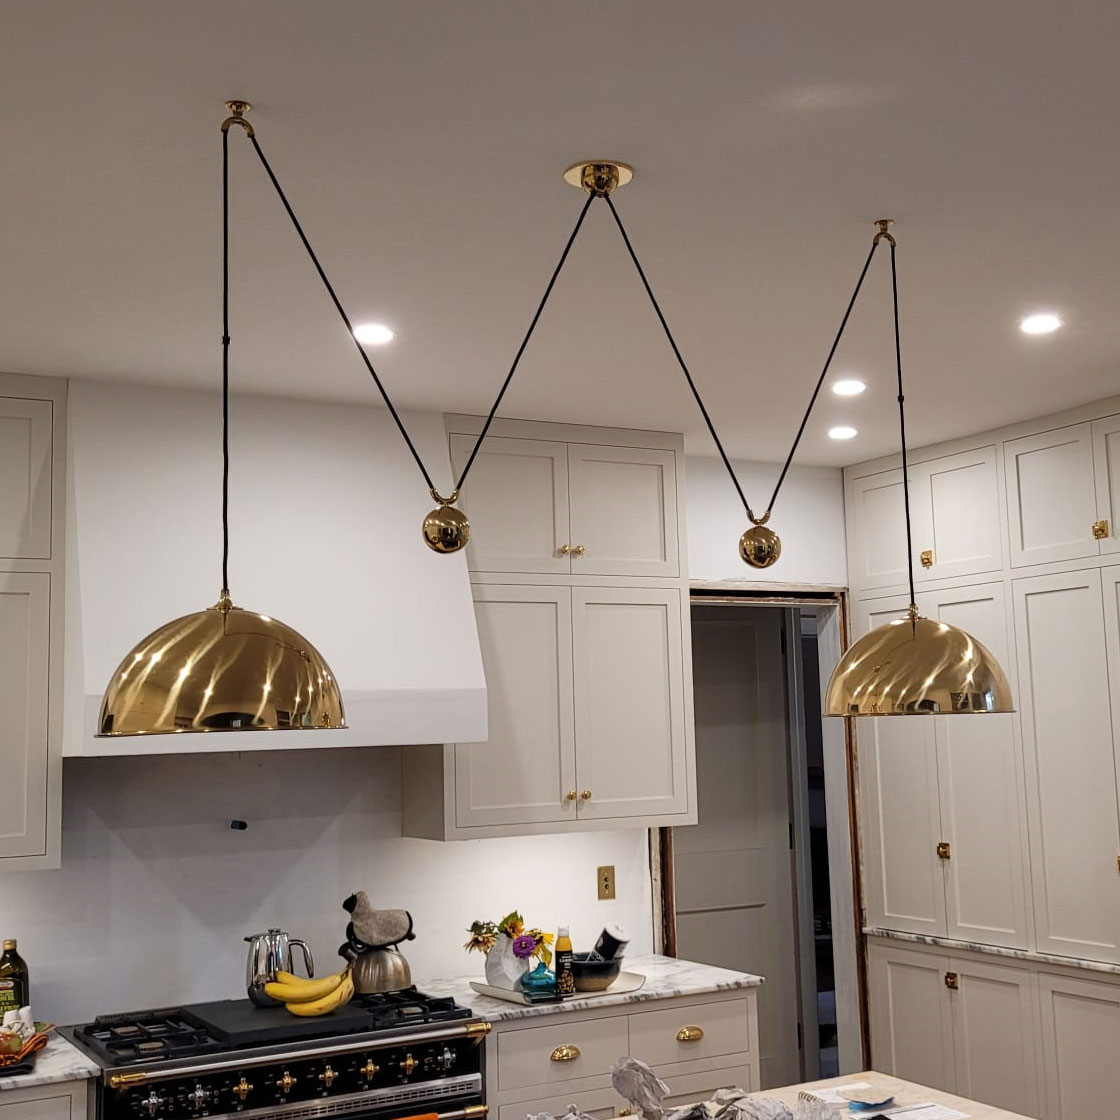 Hanging lights installed in home